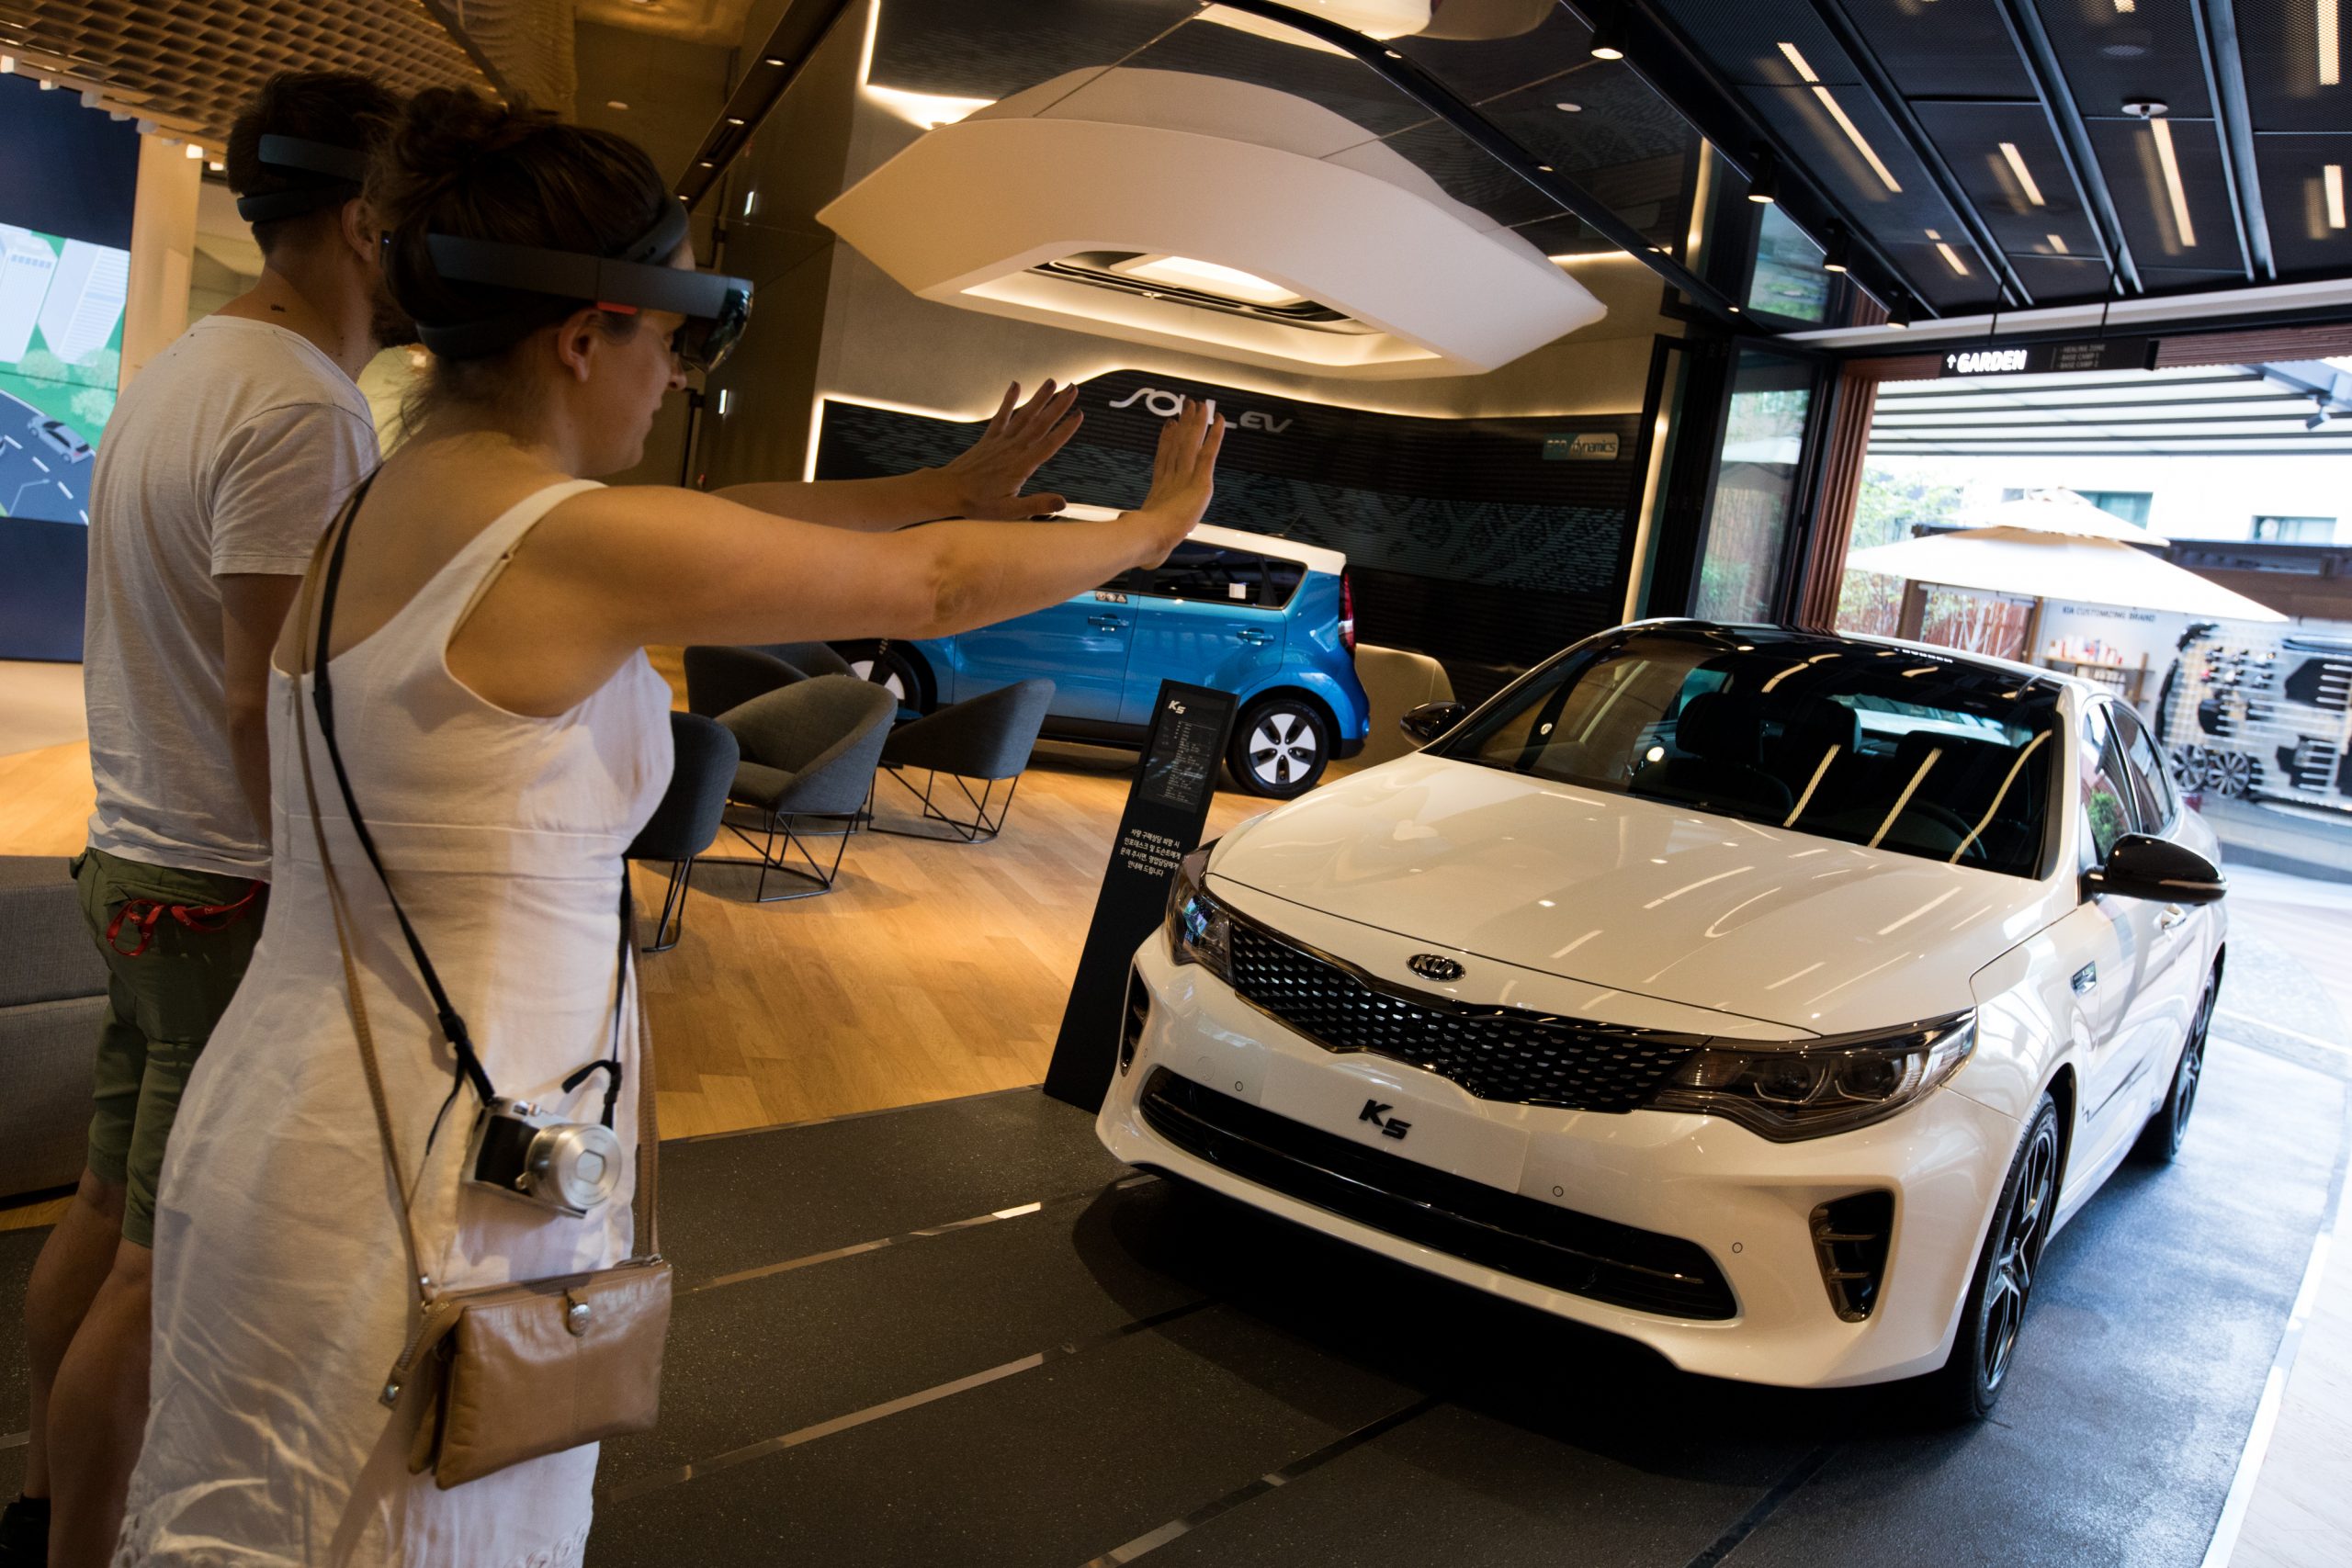 A customer tests out a HoloLens Virtual Reality headset to look at a Kia K5 at the dealership